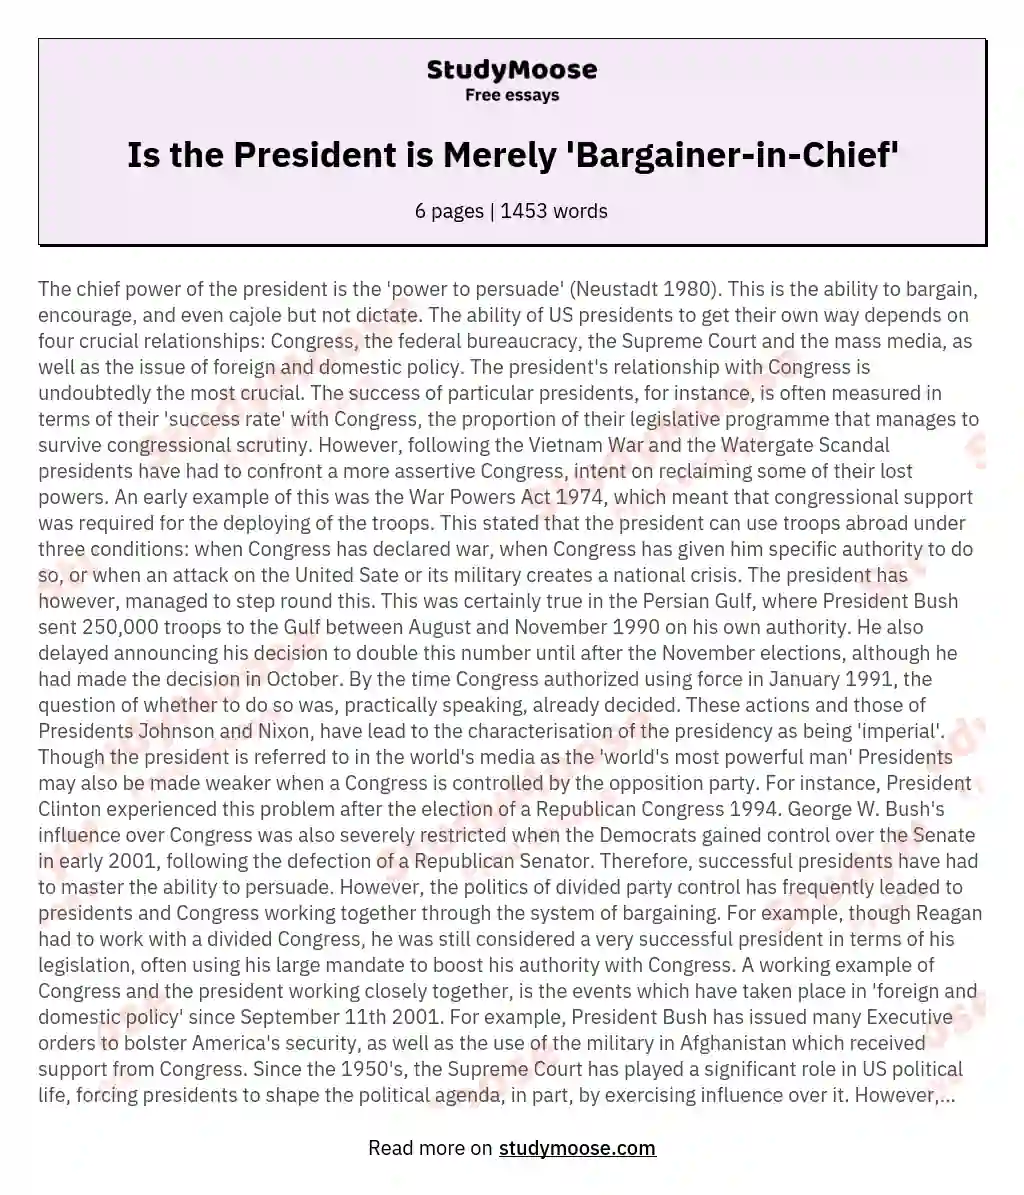 Is the President is Merely 'Bargainer-in-Chief' essay